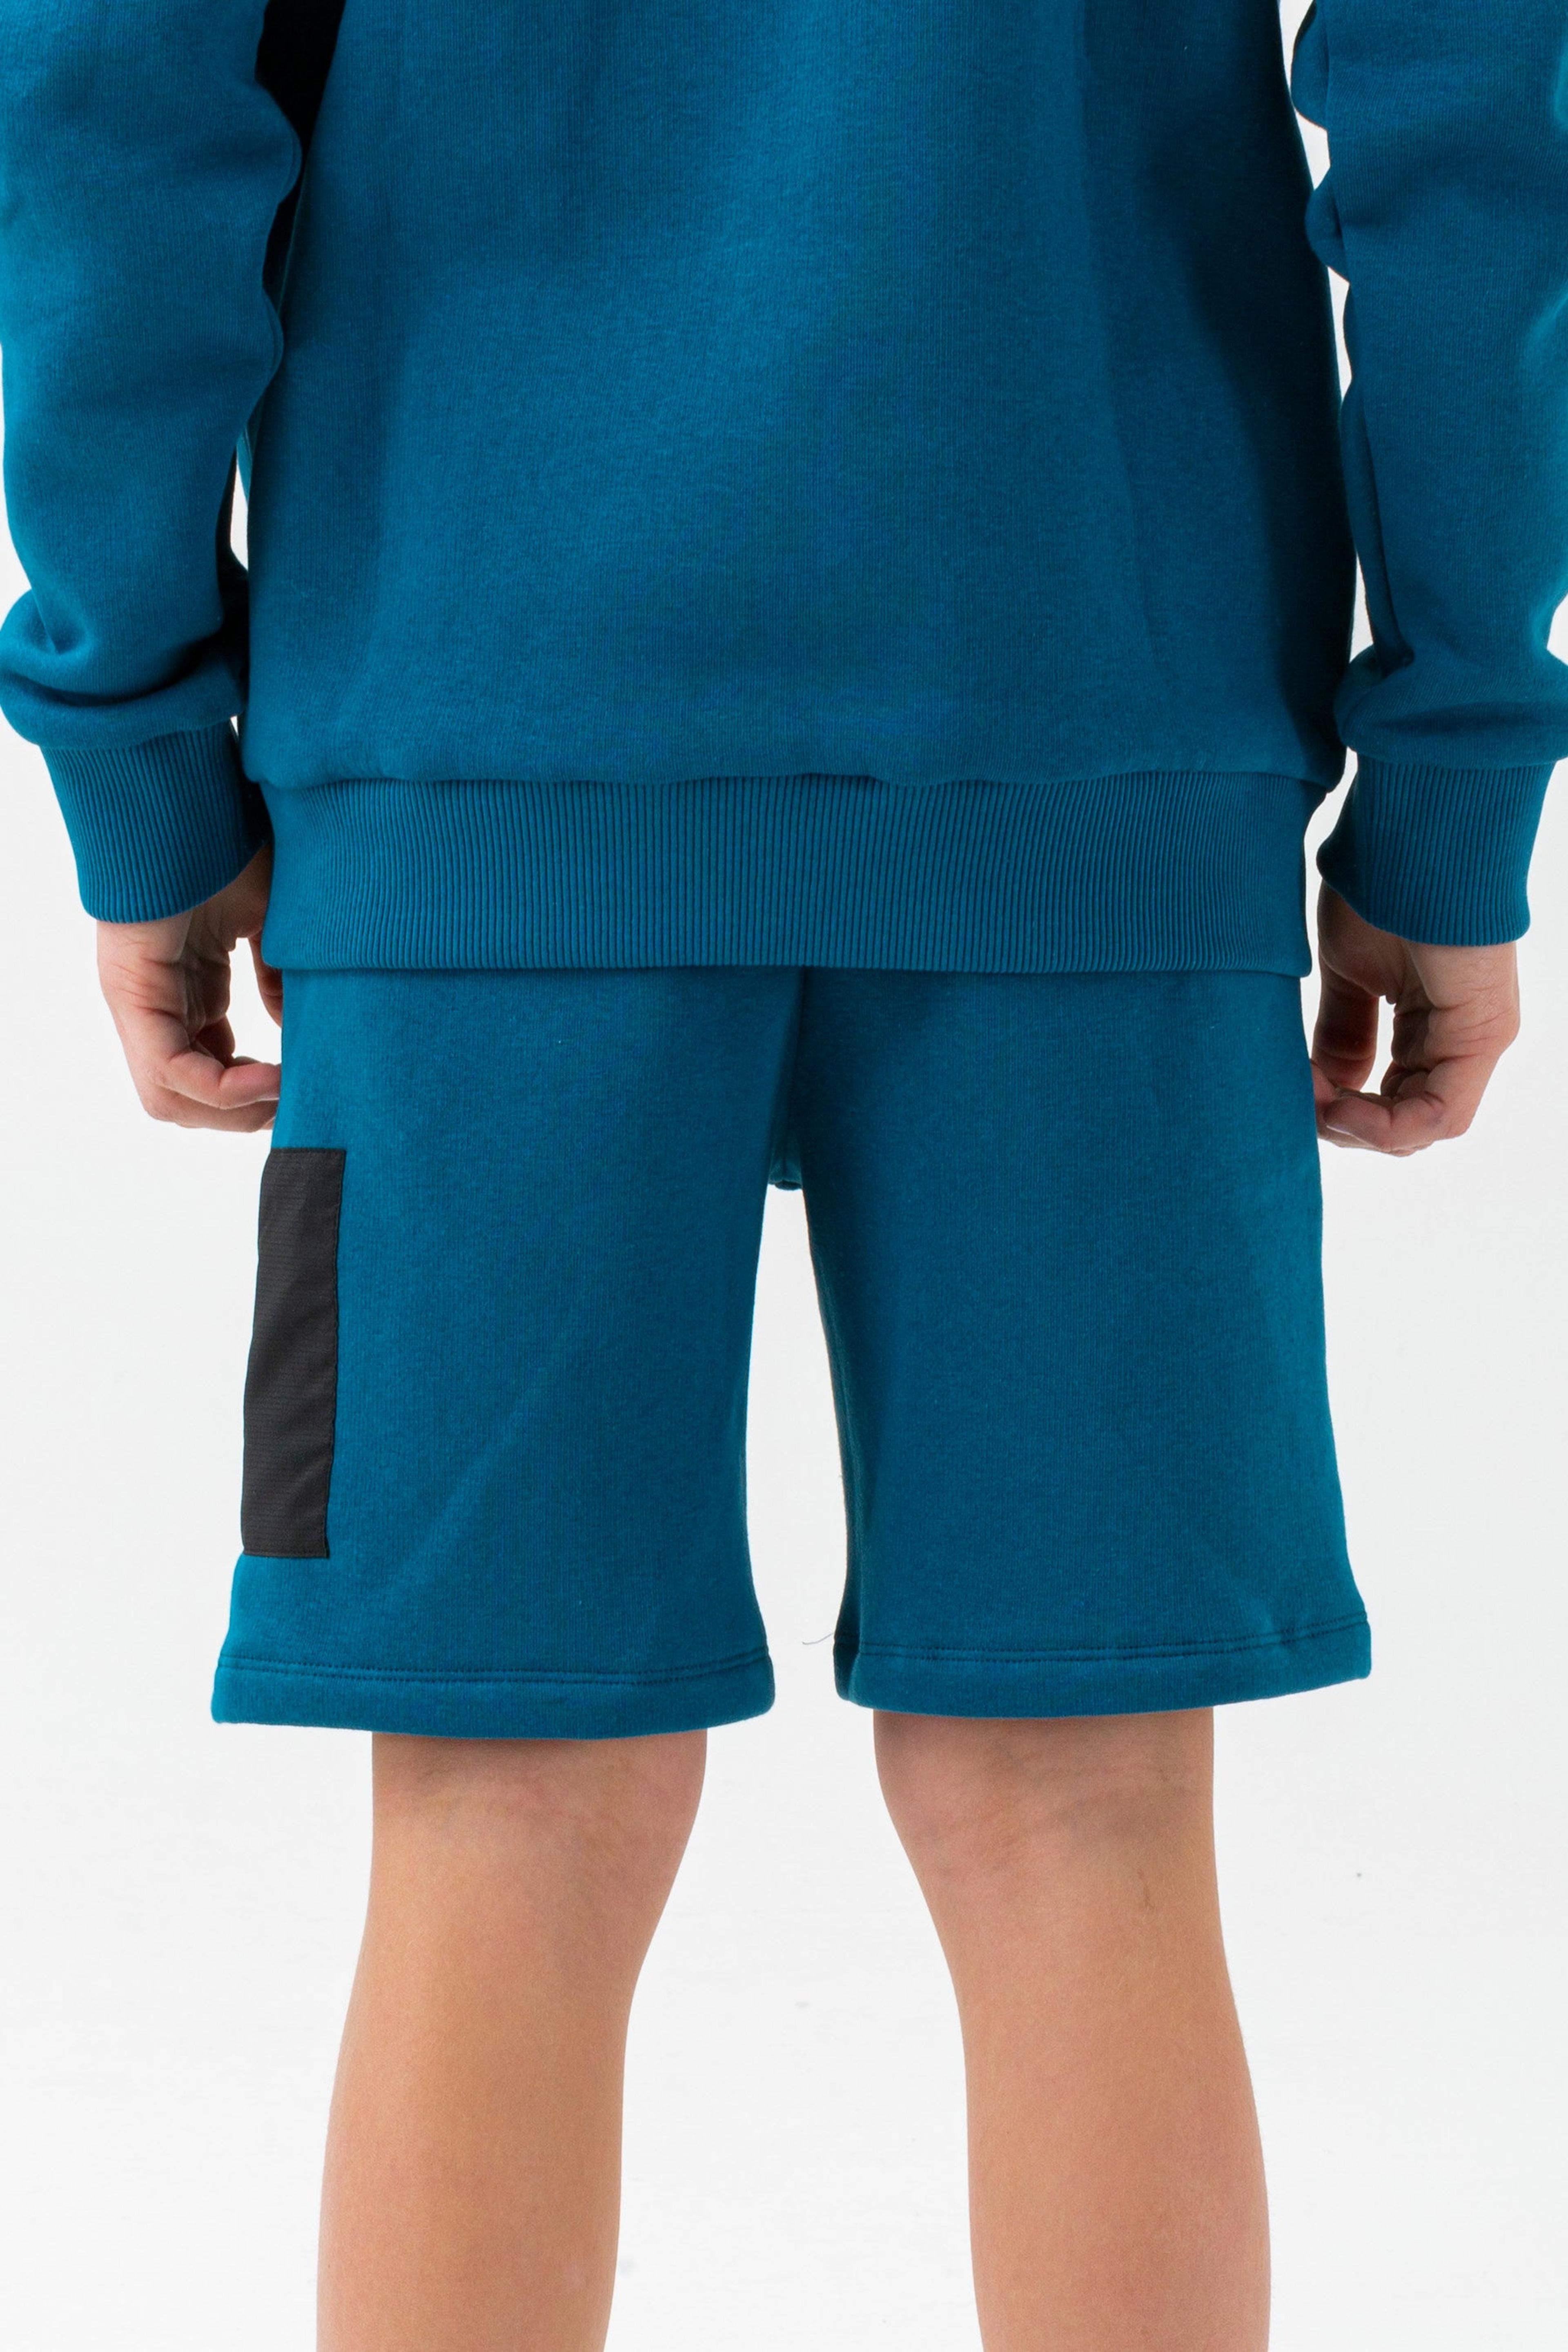 Alternate View 1 of HYPE BOYS TEAL COMMAND SHORTS